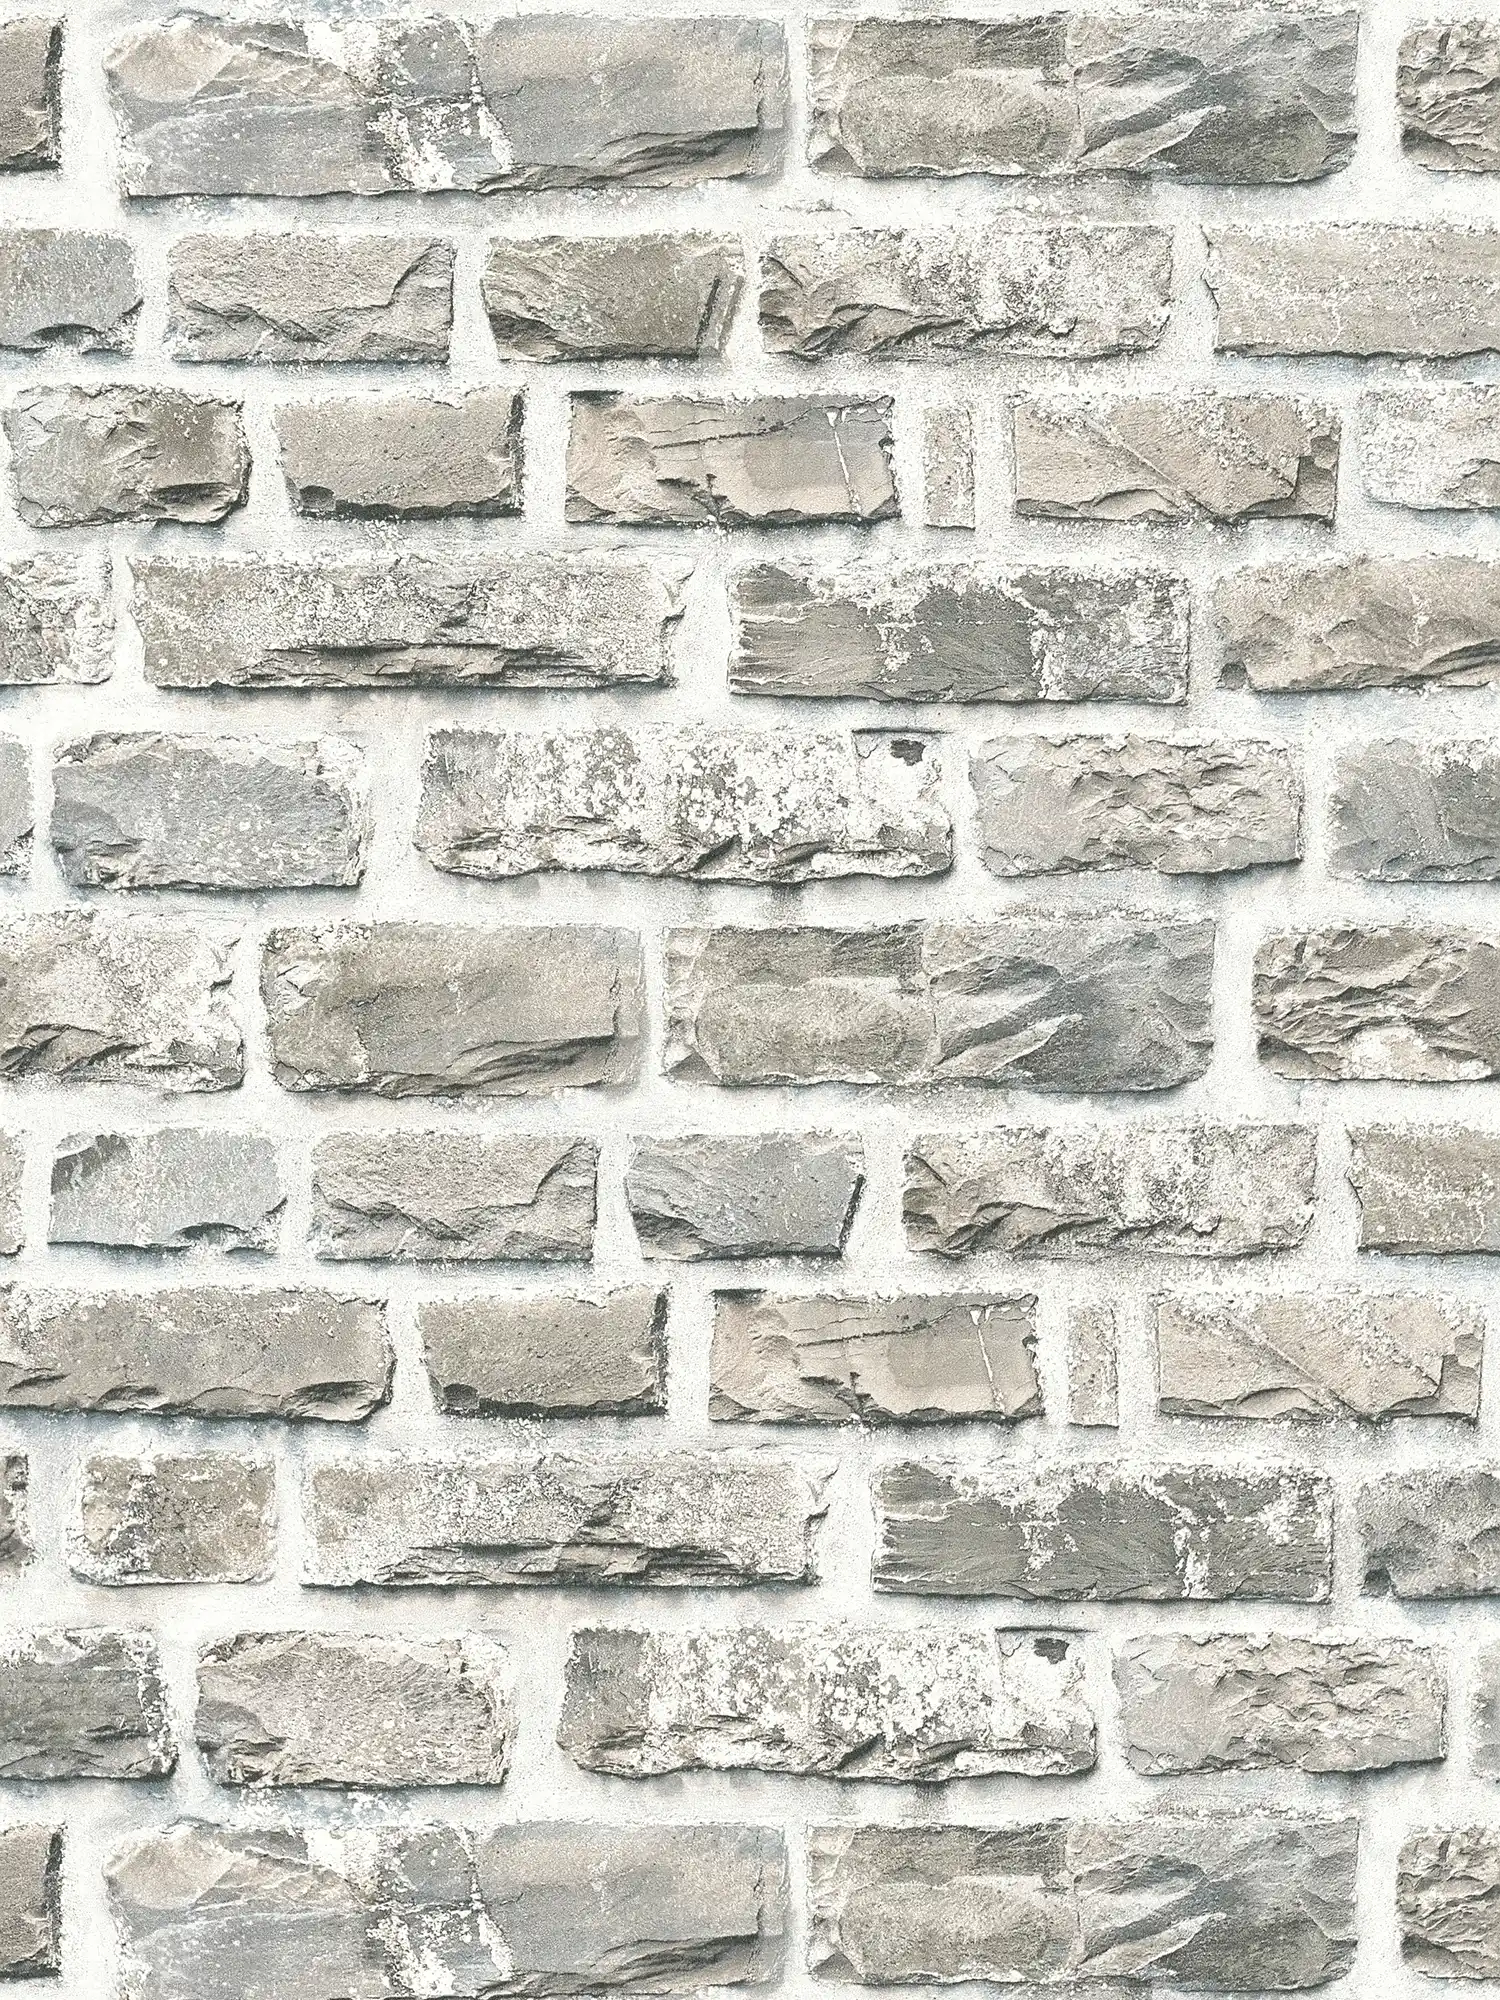         Wallpaper in stone look with quarry stones, natural stone - beige, grey
    